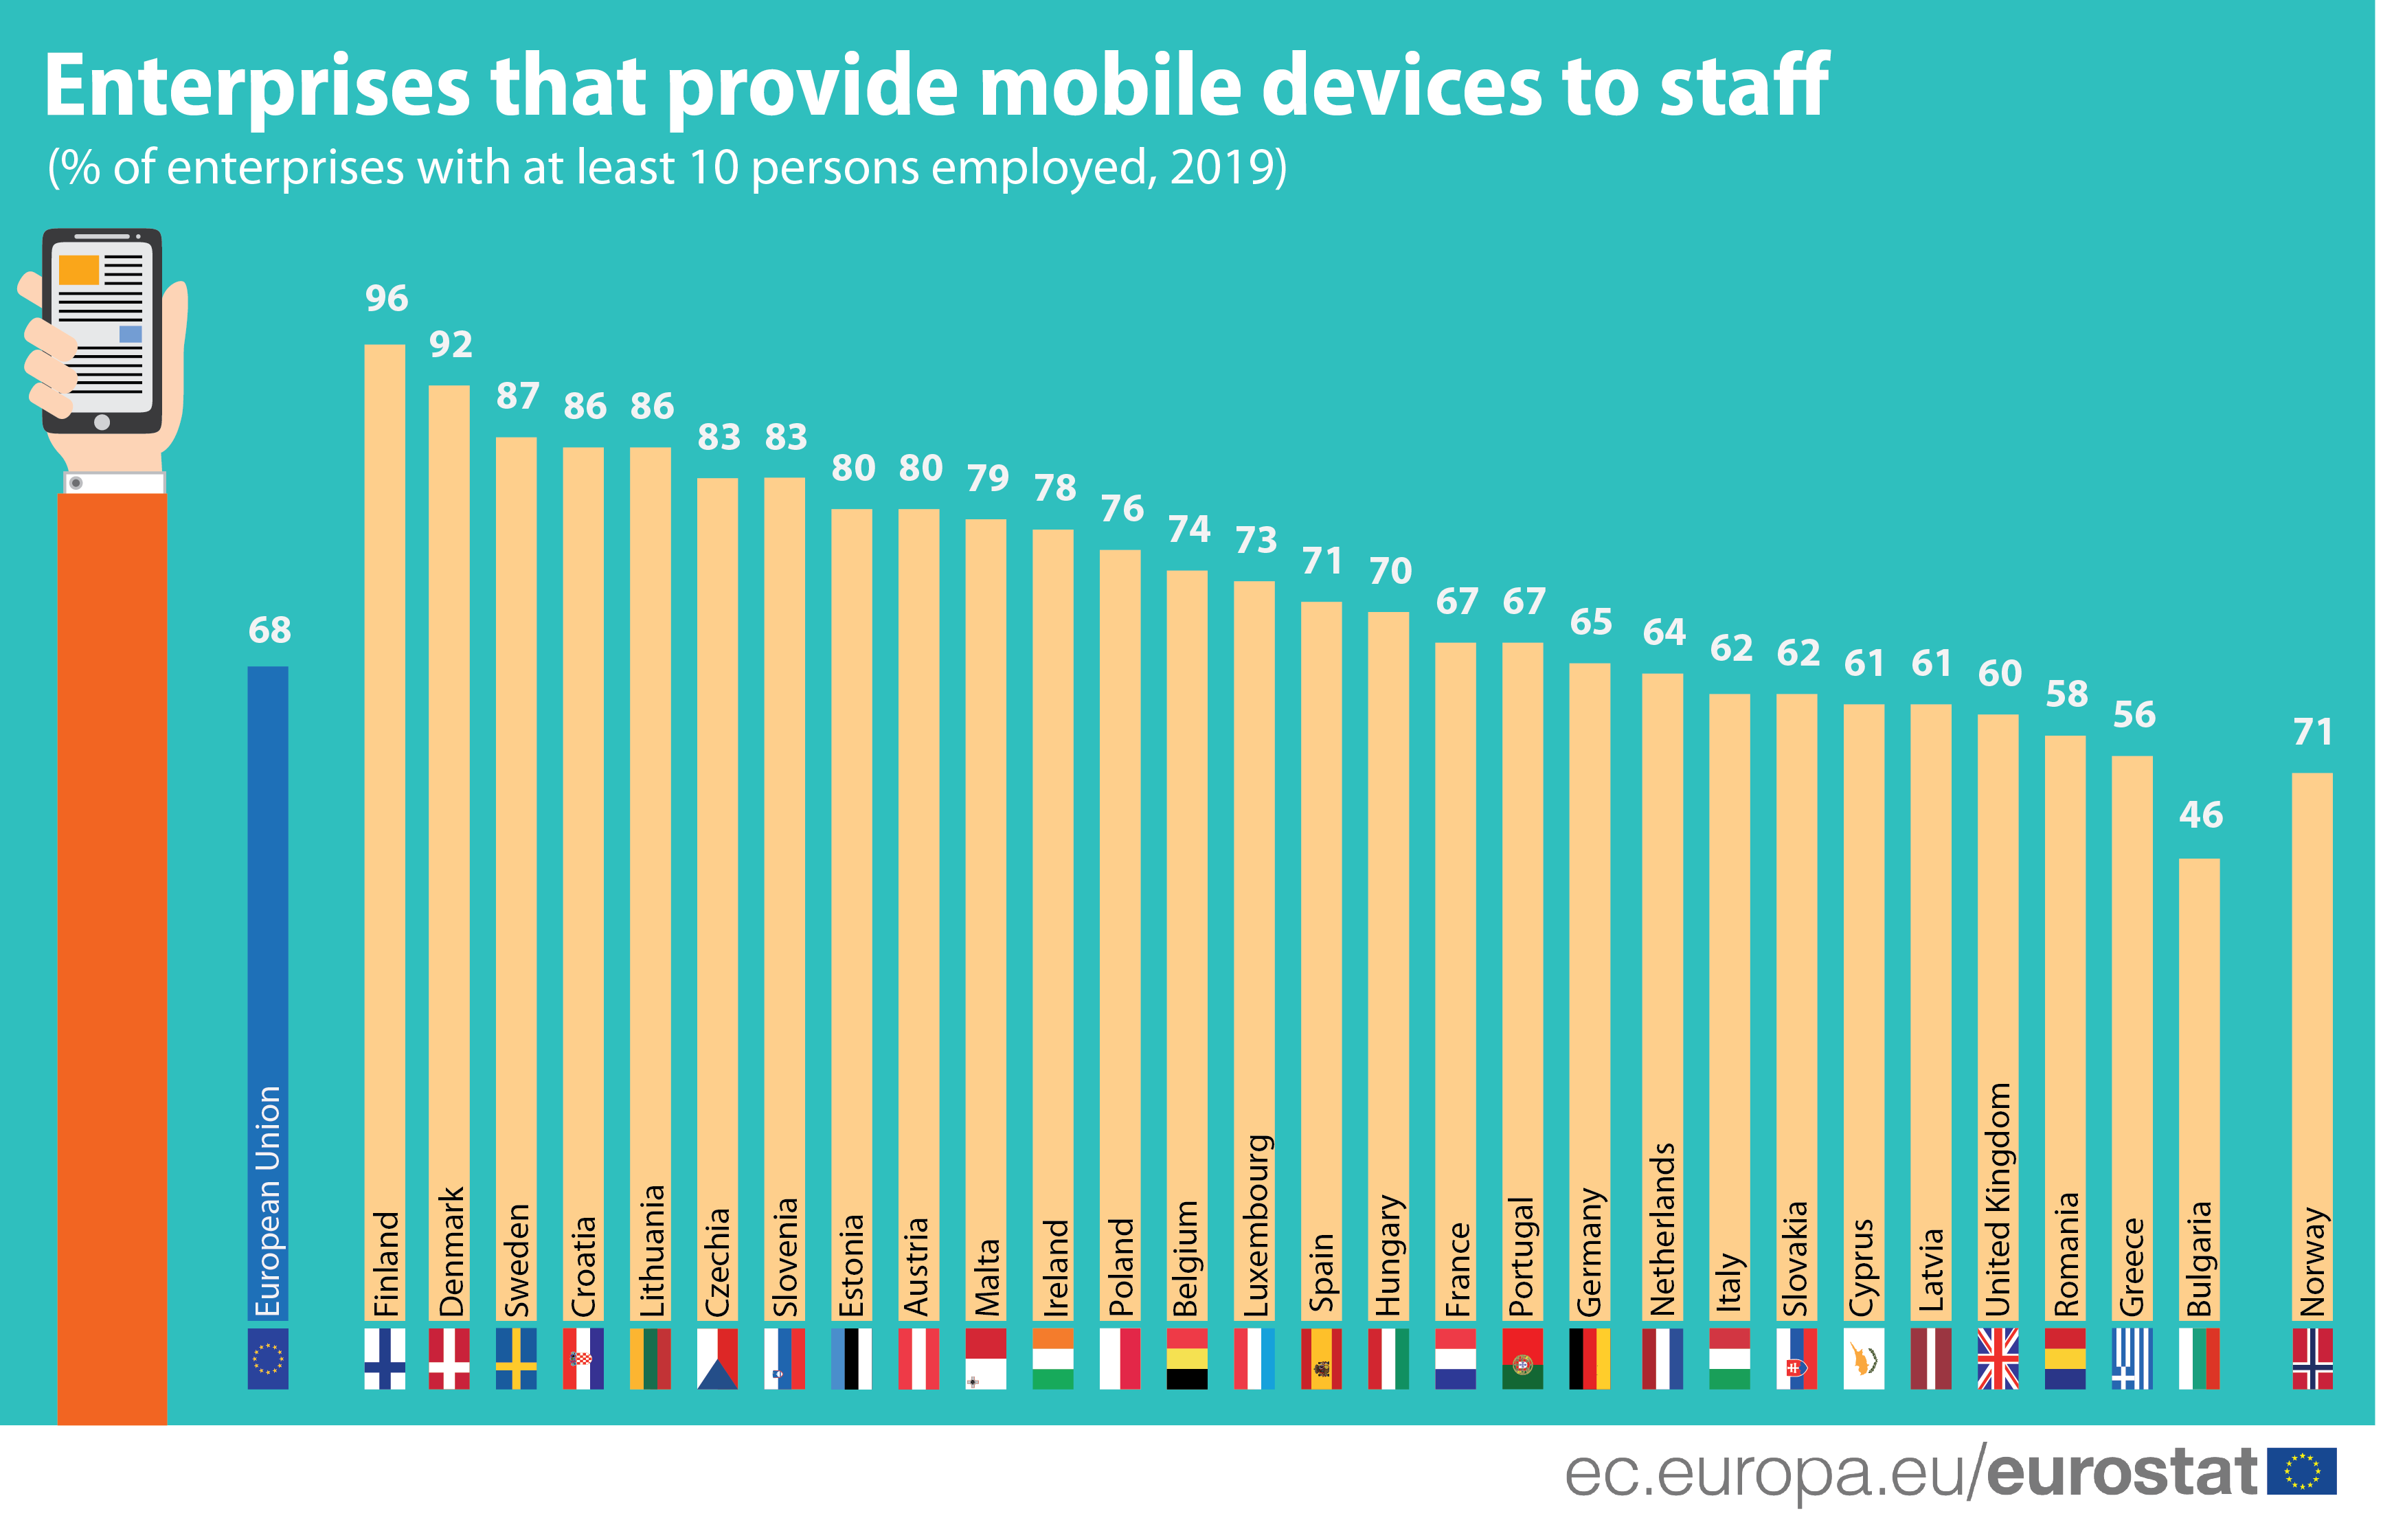 Graph: Enterprises that provide mobile devices to connect to the internet to staff, for business purposes